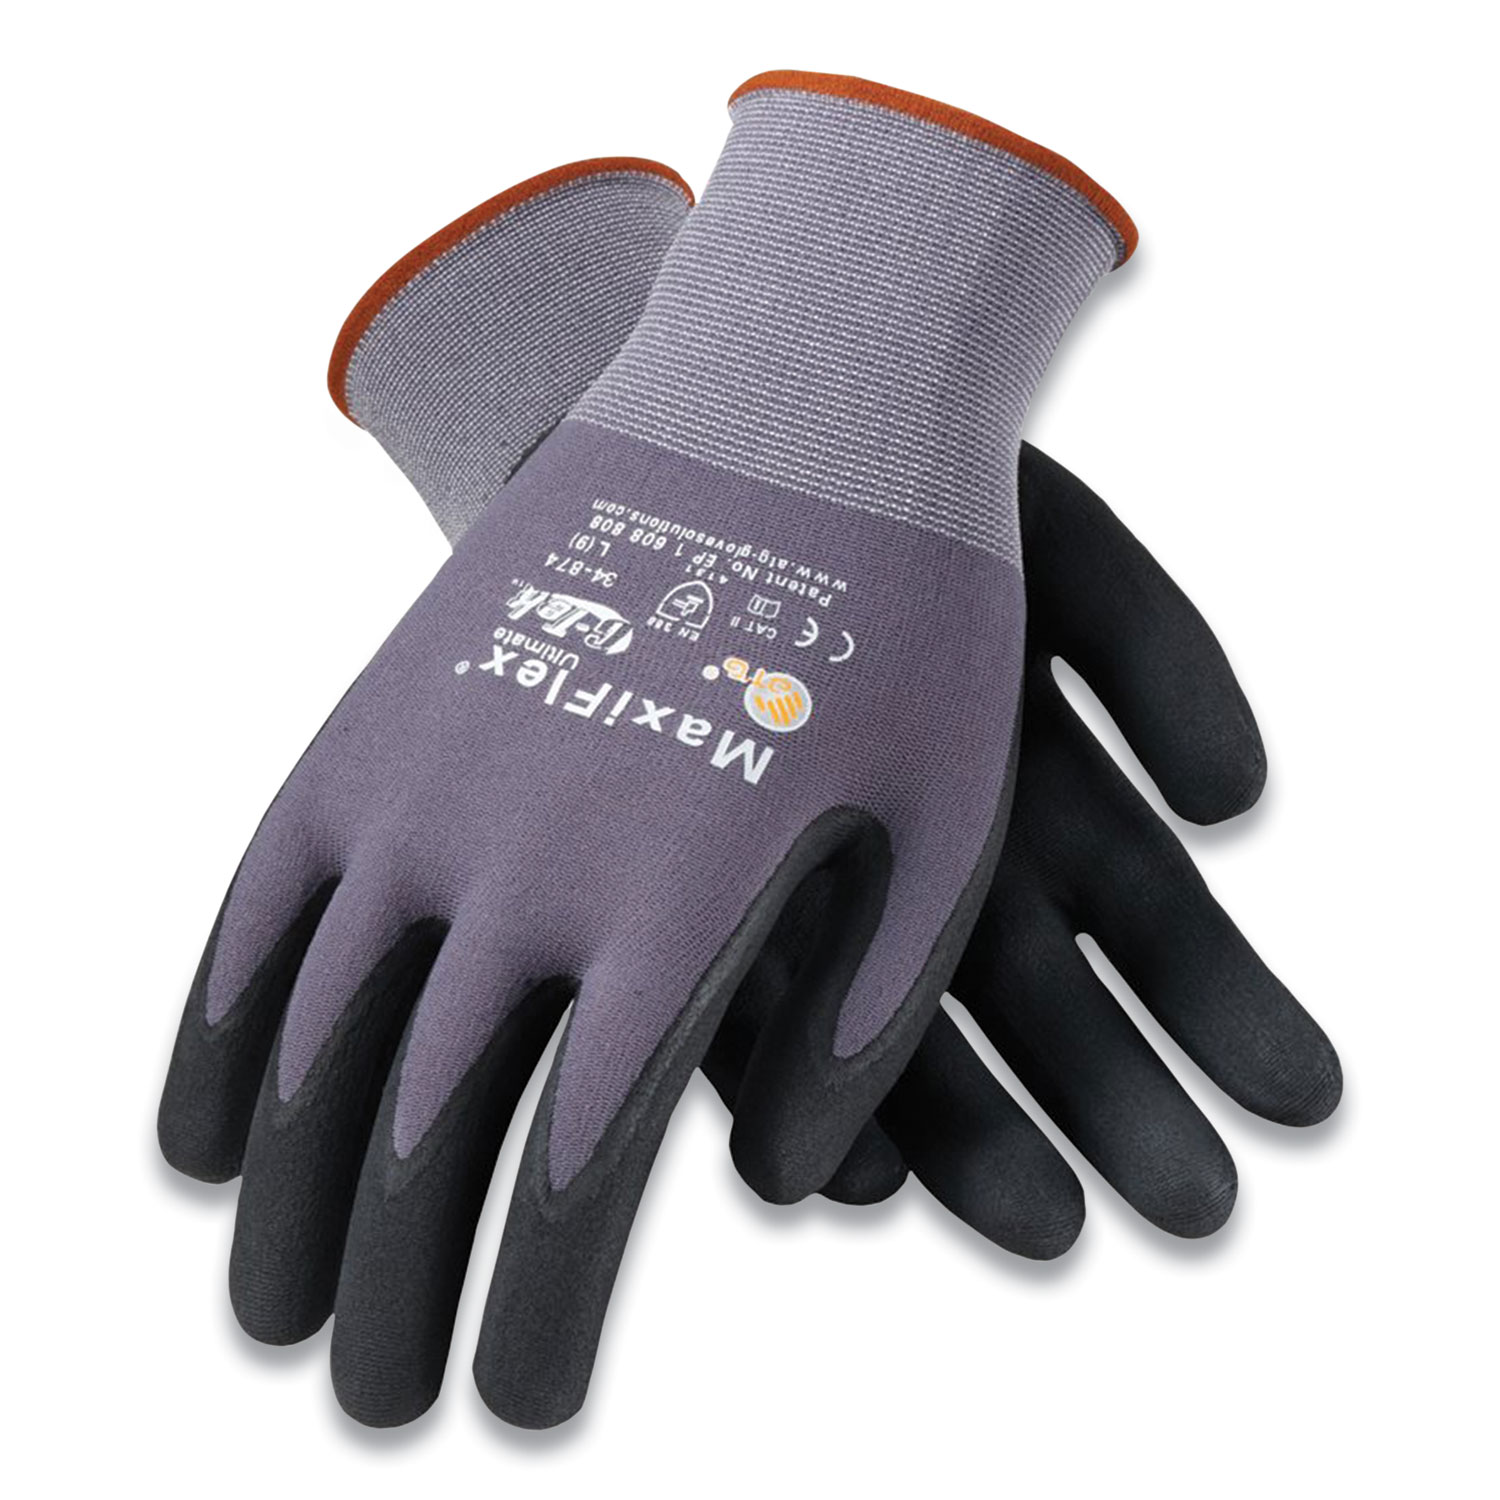  MaxiFlex 34-874/L Ultimate Seamless Knit Nylon Gloves, Nitrile Coated MicroFoam Grip on Palm and Fingers, Large, Gray, 12 Pairs (PID179947) 